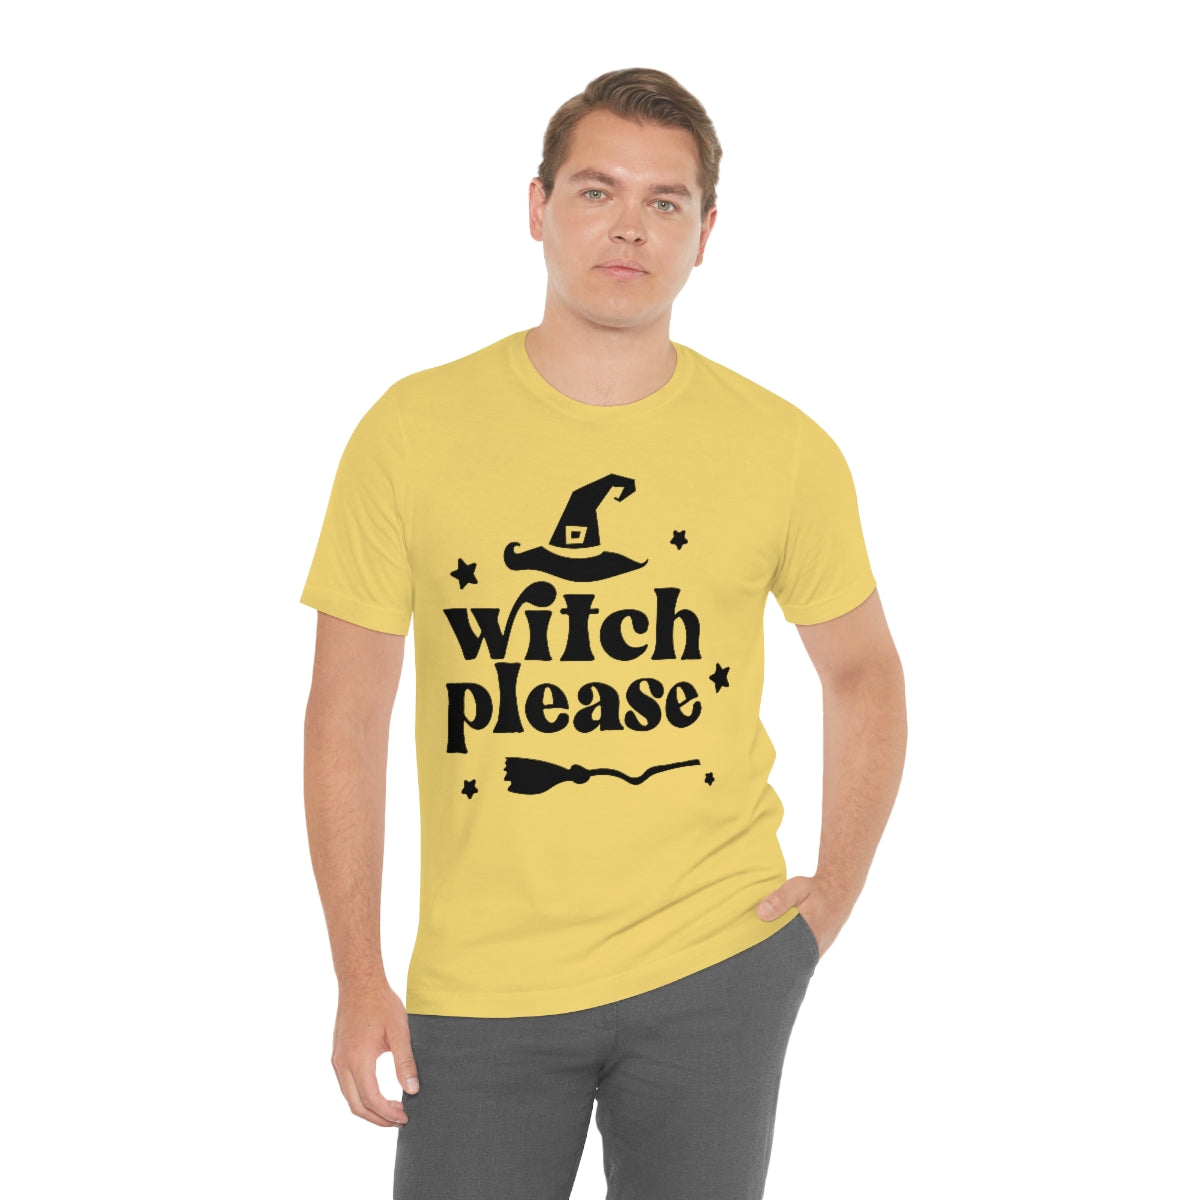 Halloween Shirt - Witch Please Broom - Witch Shirt - Witch Tee Shirt - Halloween Tee - Halloween Shirt - Witch Please Shirt